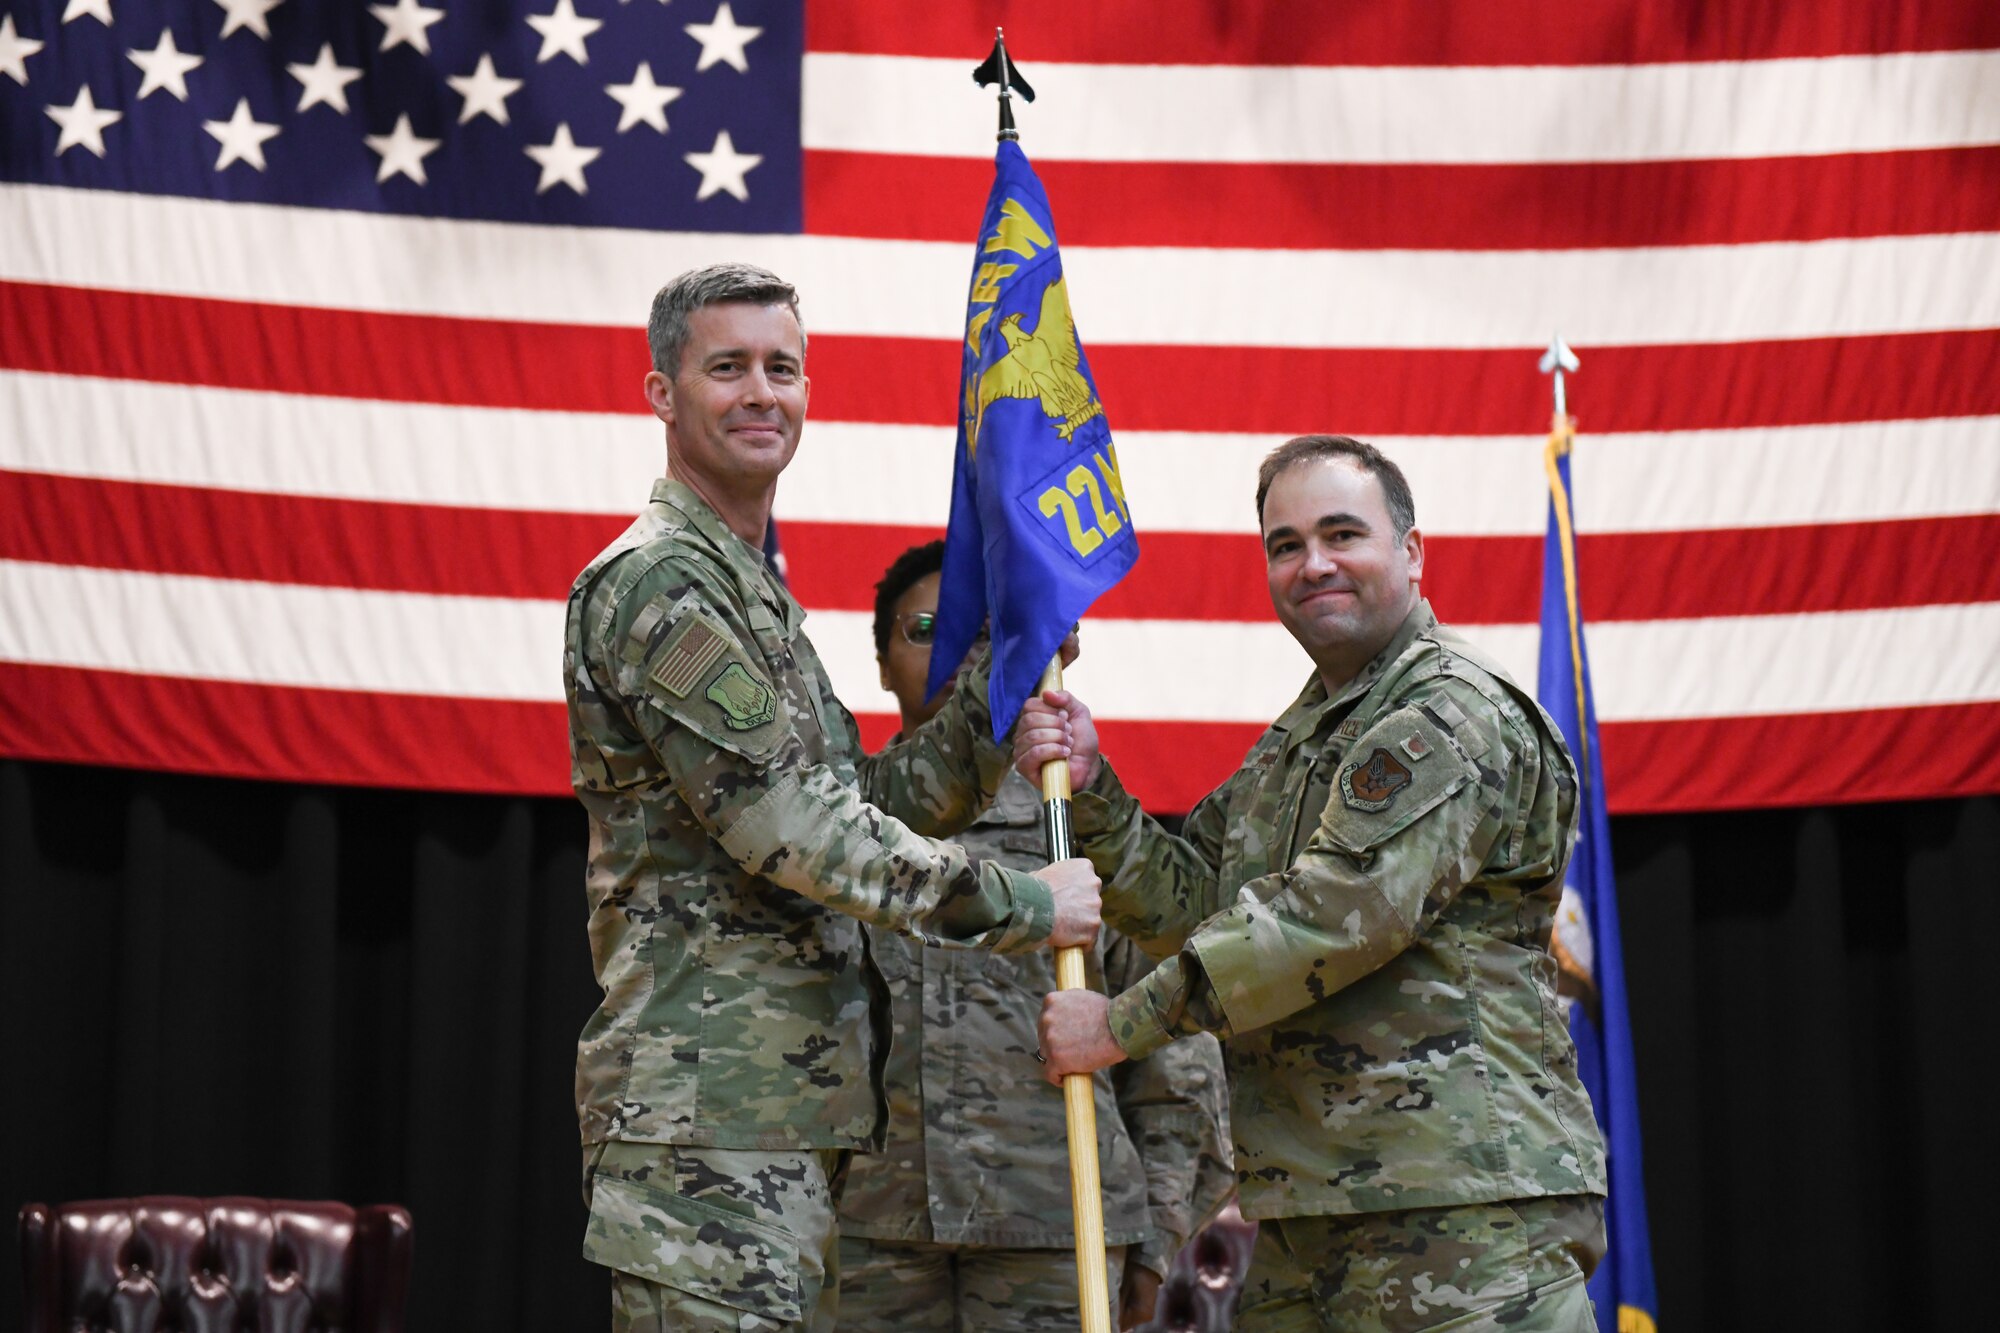 Col. Heath Frye, 22nd Mission Support Group commander, gains command during a change of command ceremony June 17, 2021, at McConnell Air Force Base, Kansas. The passing of the guideon is a time-honored tradition that symbolizes a transfer of authority. (U.S. Air Force photo by Senior Airman Alan Ricker)